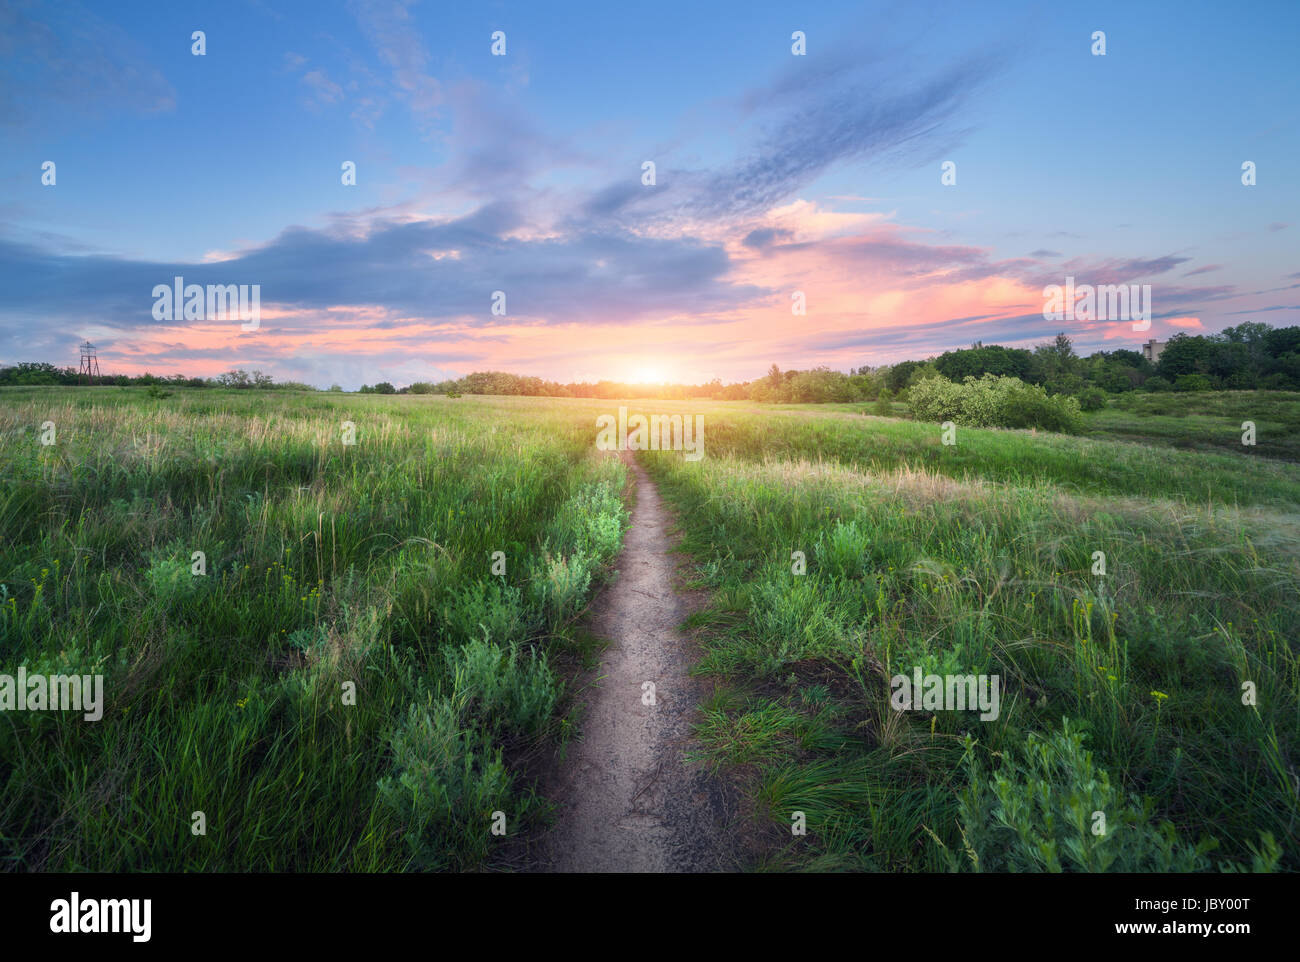 Amazing walkway through grass field at sunset. Colorful summer landscape with blooming green grass, trail, beautiful blue sky with pink clouds at dusk Stock Photo